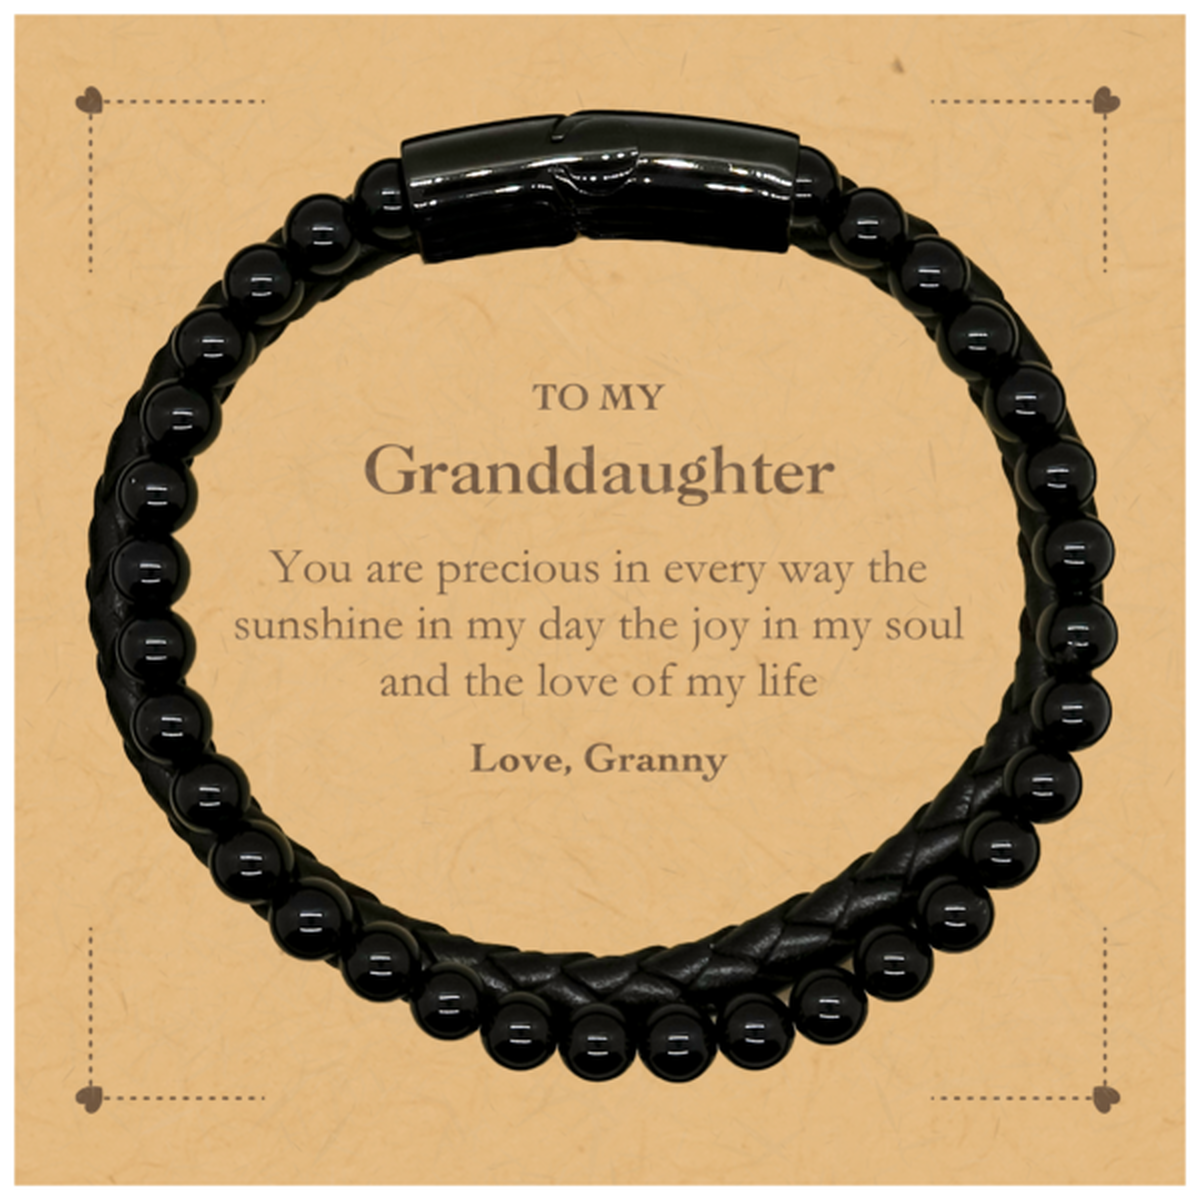 Graduation Gifts for Granddaughter Stone Leather Bracelets Present from Granny, Christmas Granddaughter Birthday Gifts Granddaughter You are precious in every way the sunshine in my day. Love, Granny